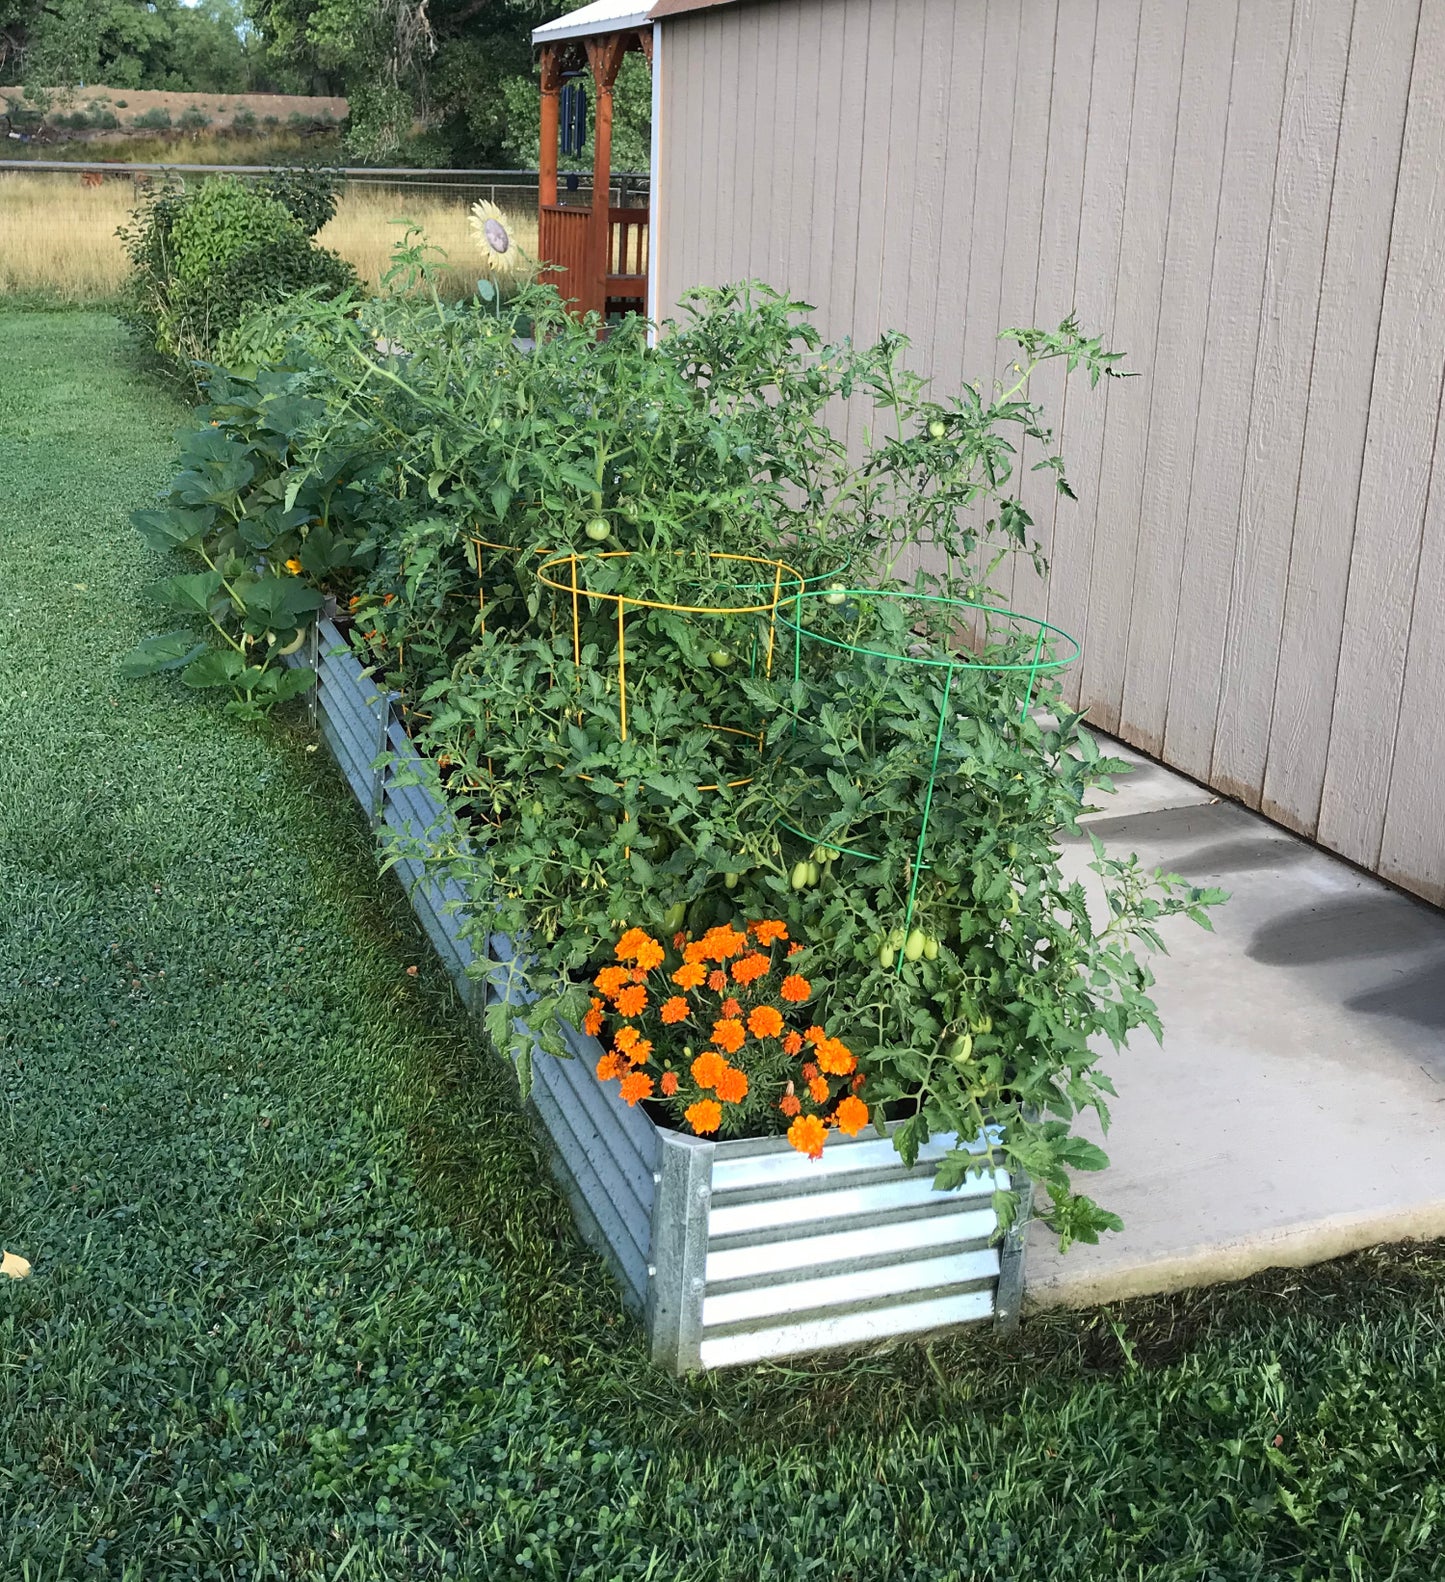 narrow sandia raised garden in back lot with marigolds, tomatoes